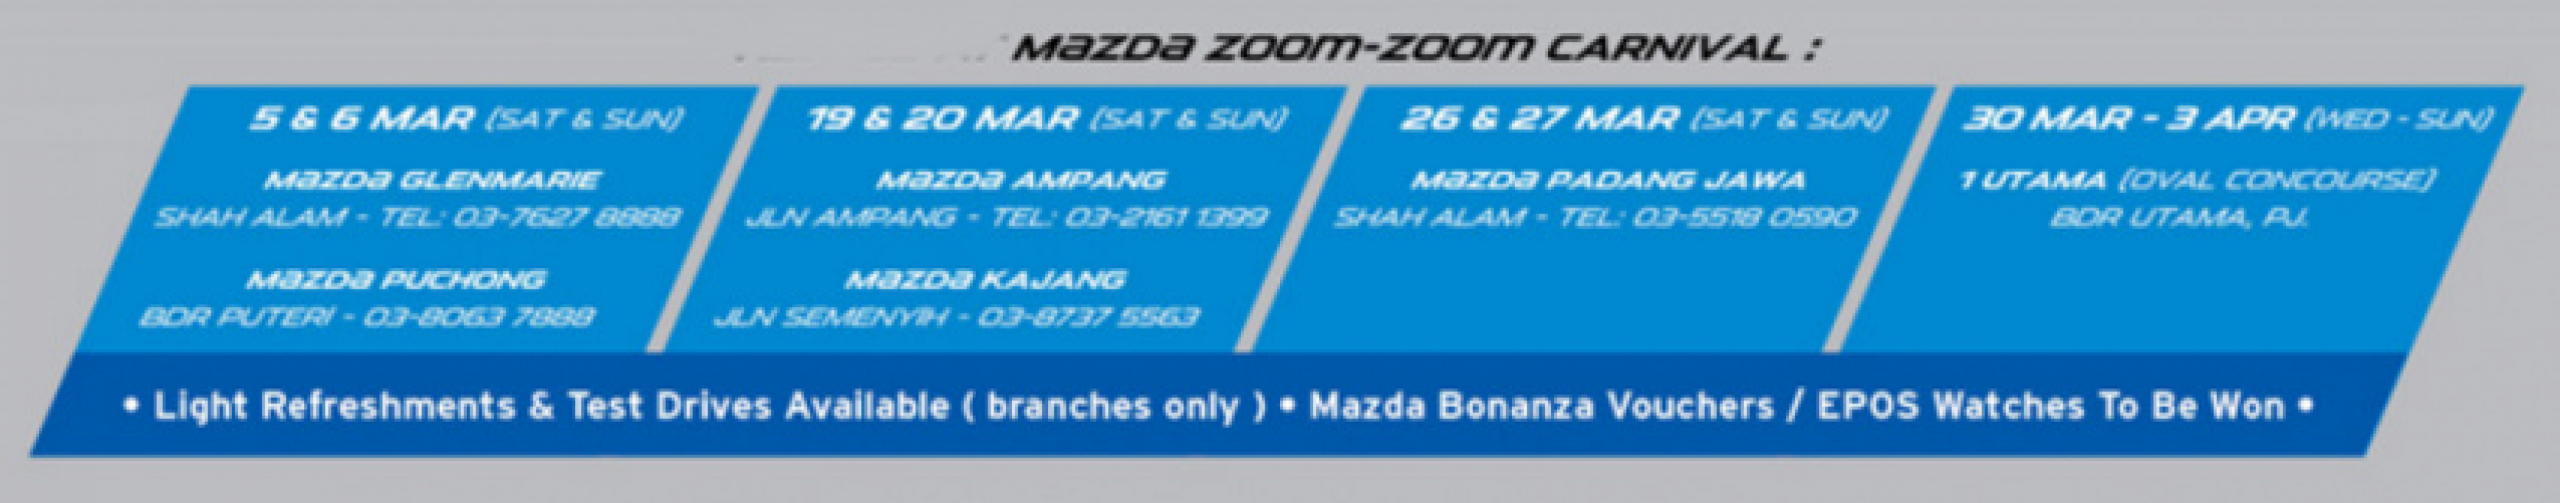 autos, cars, mazda, autos mazda, mazda promotion from march 5 until april 3